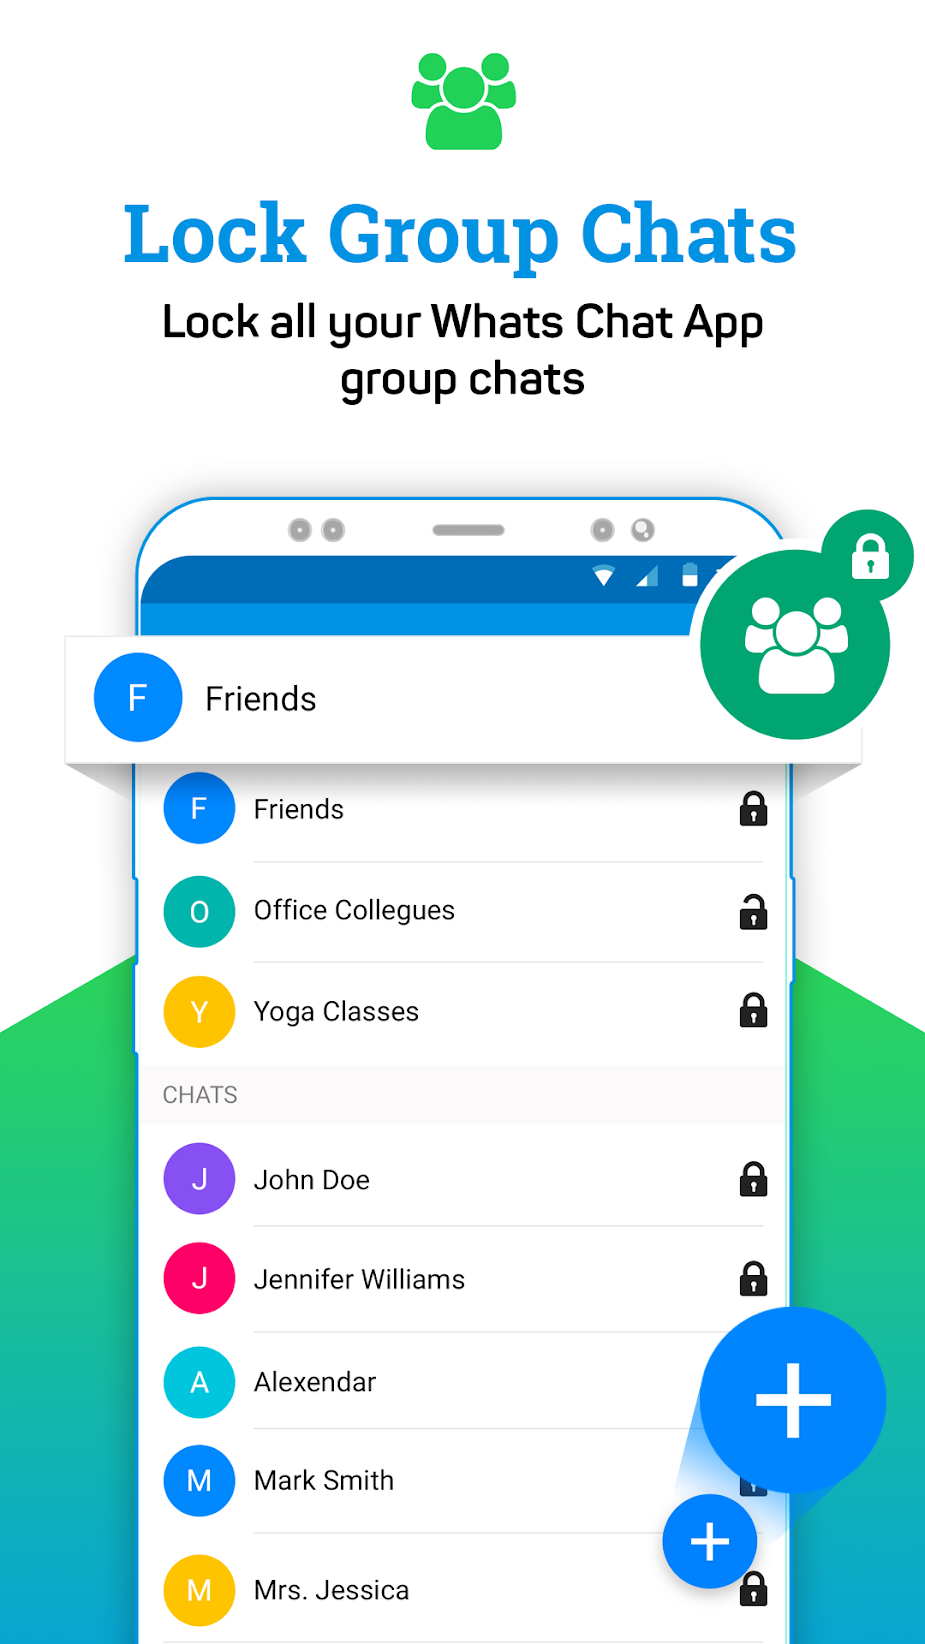 Group Chat Locker For Whats Chat App